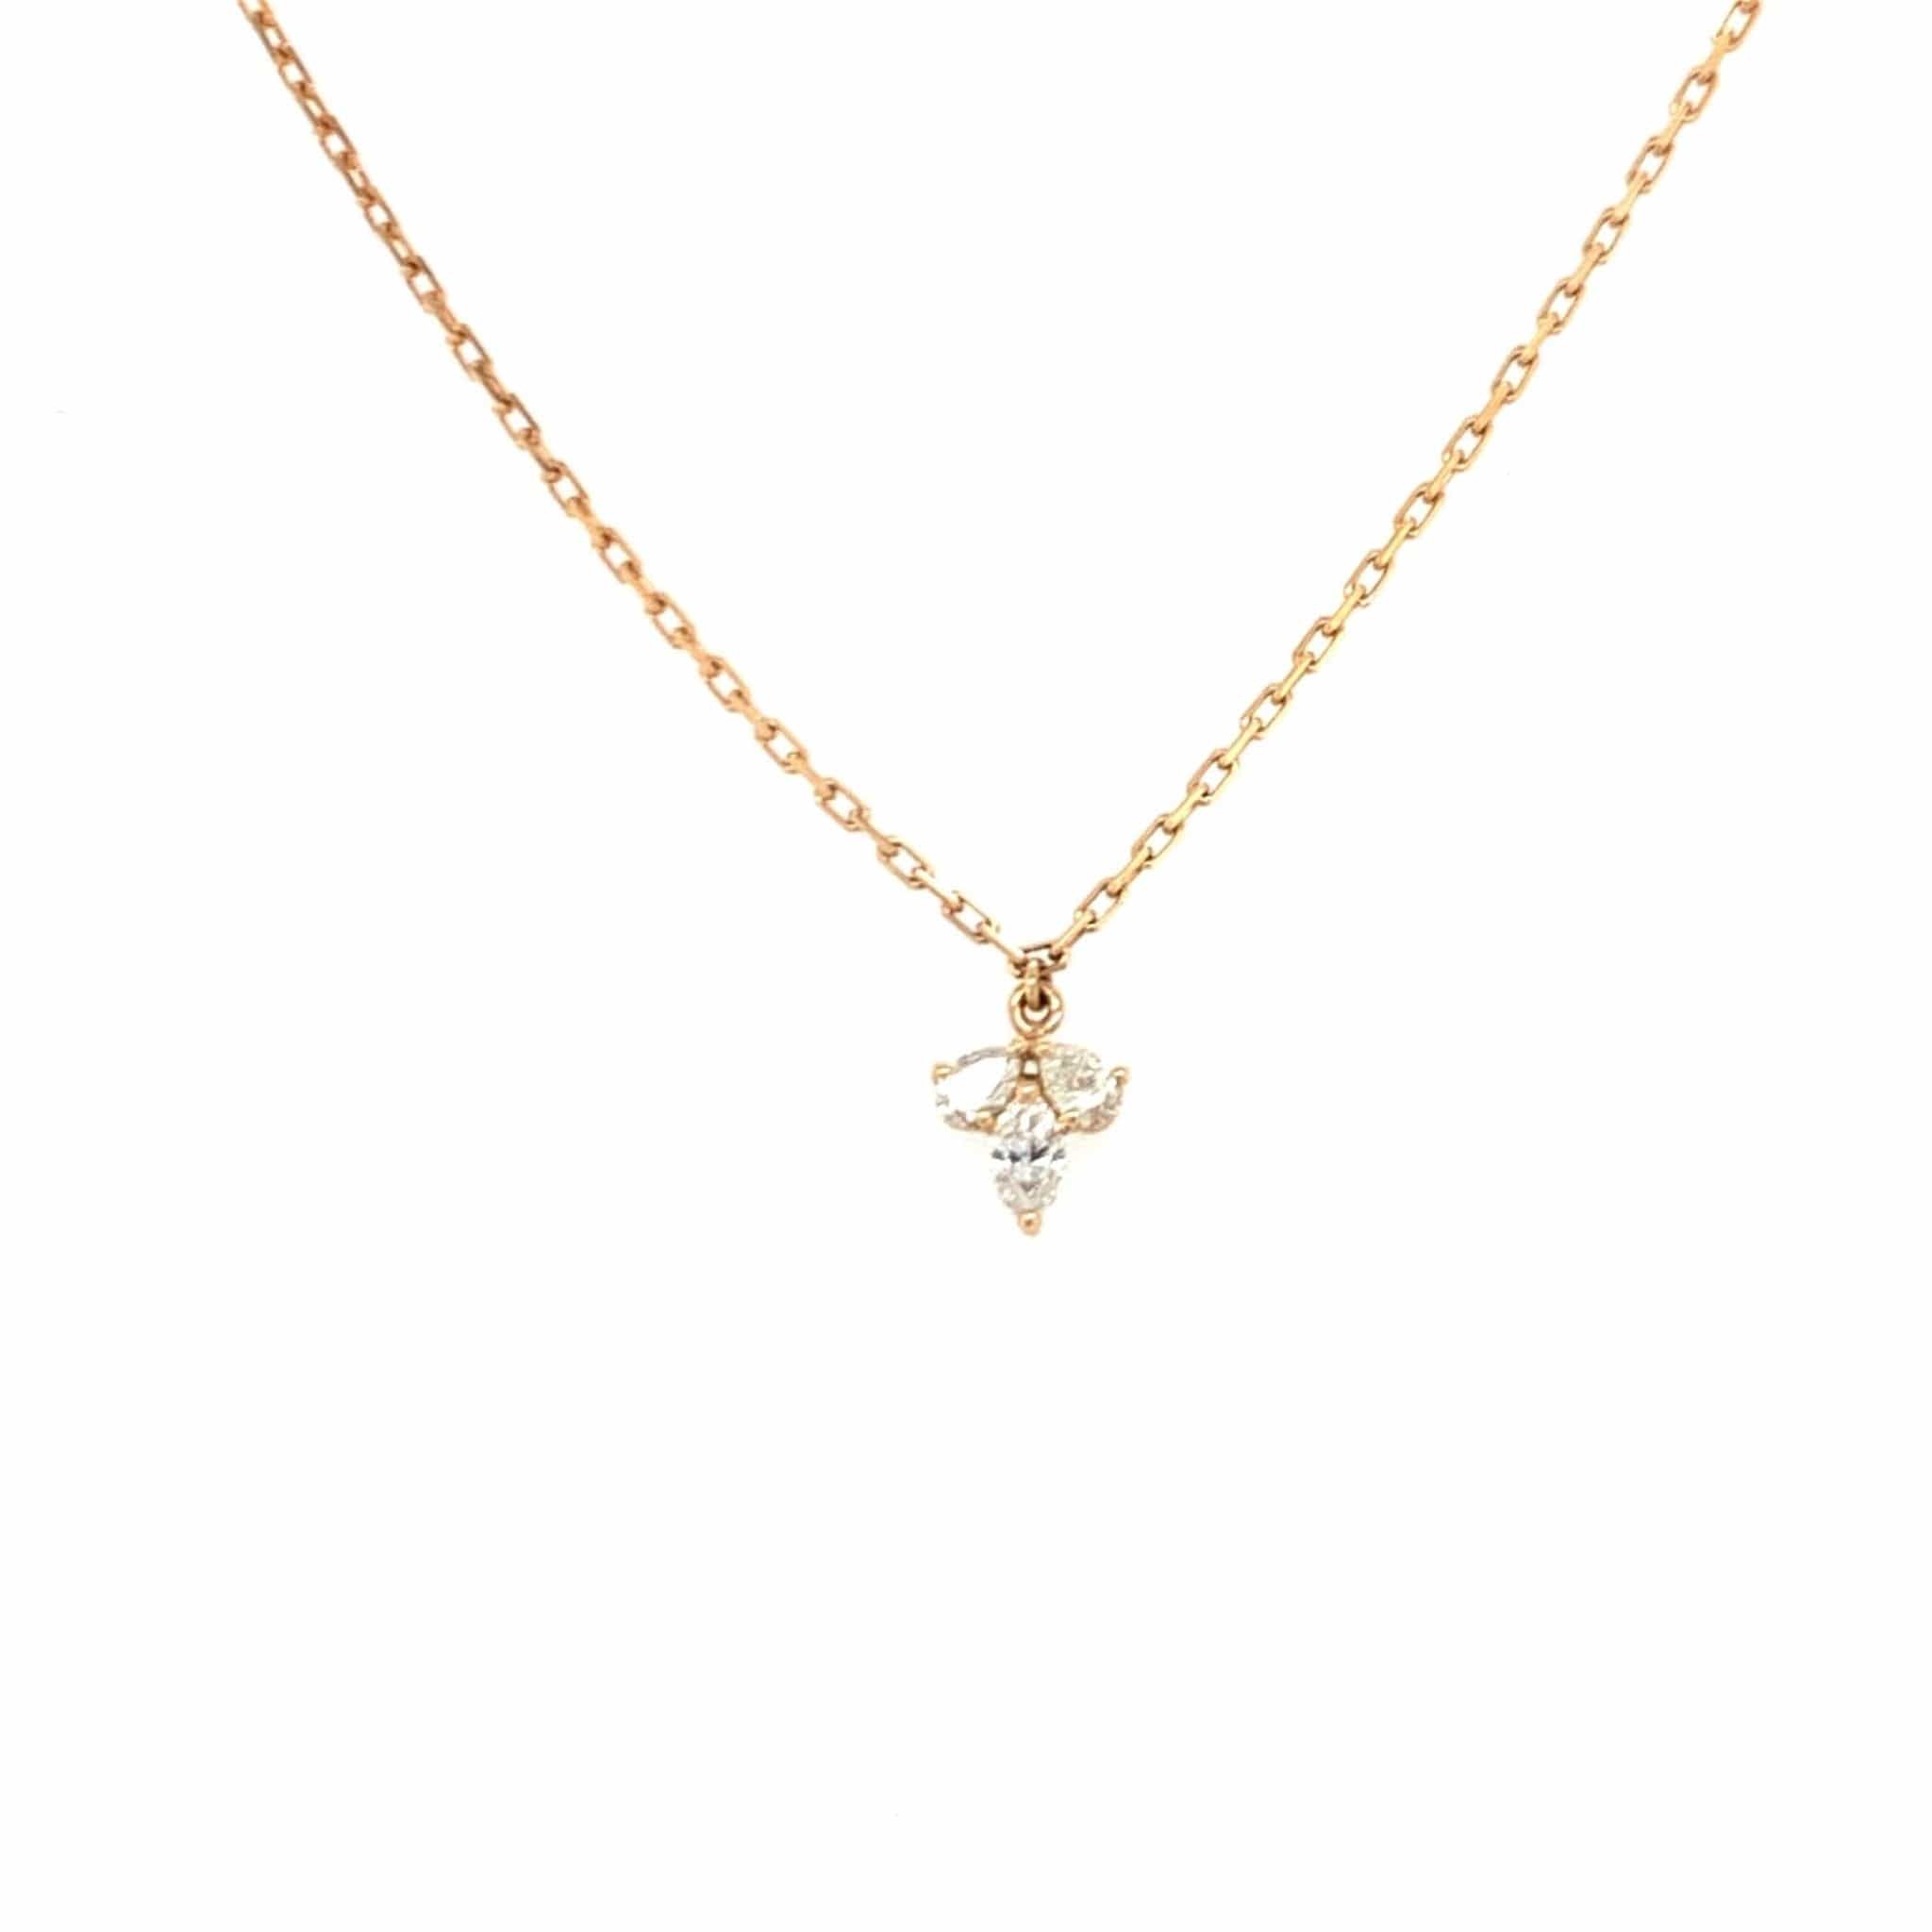 M.Fitaihi Everyday Sparkle - Rose Gold with Diamonds Choker Necklace - M.Fitaihi